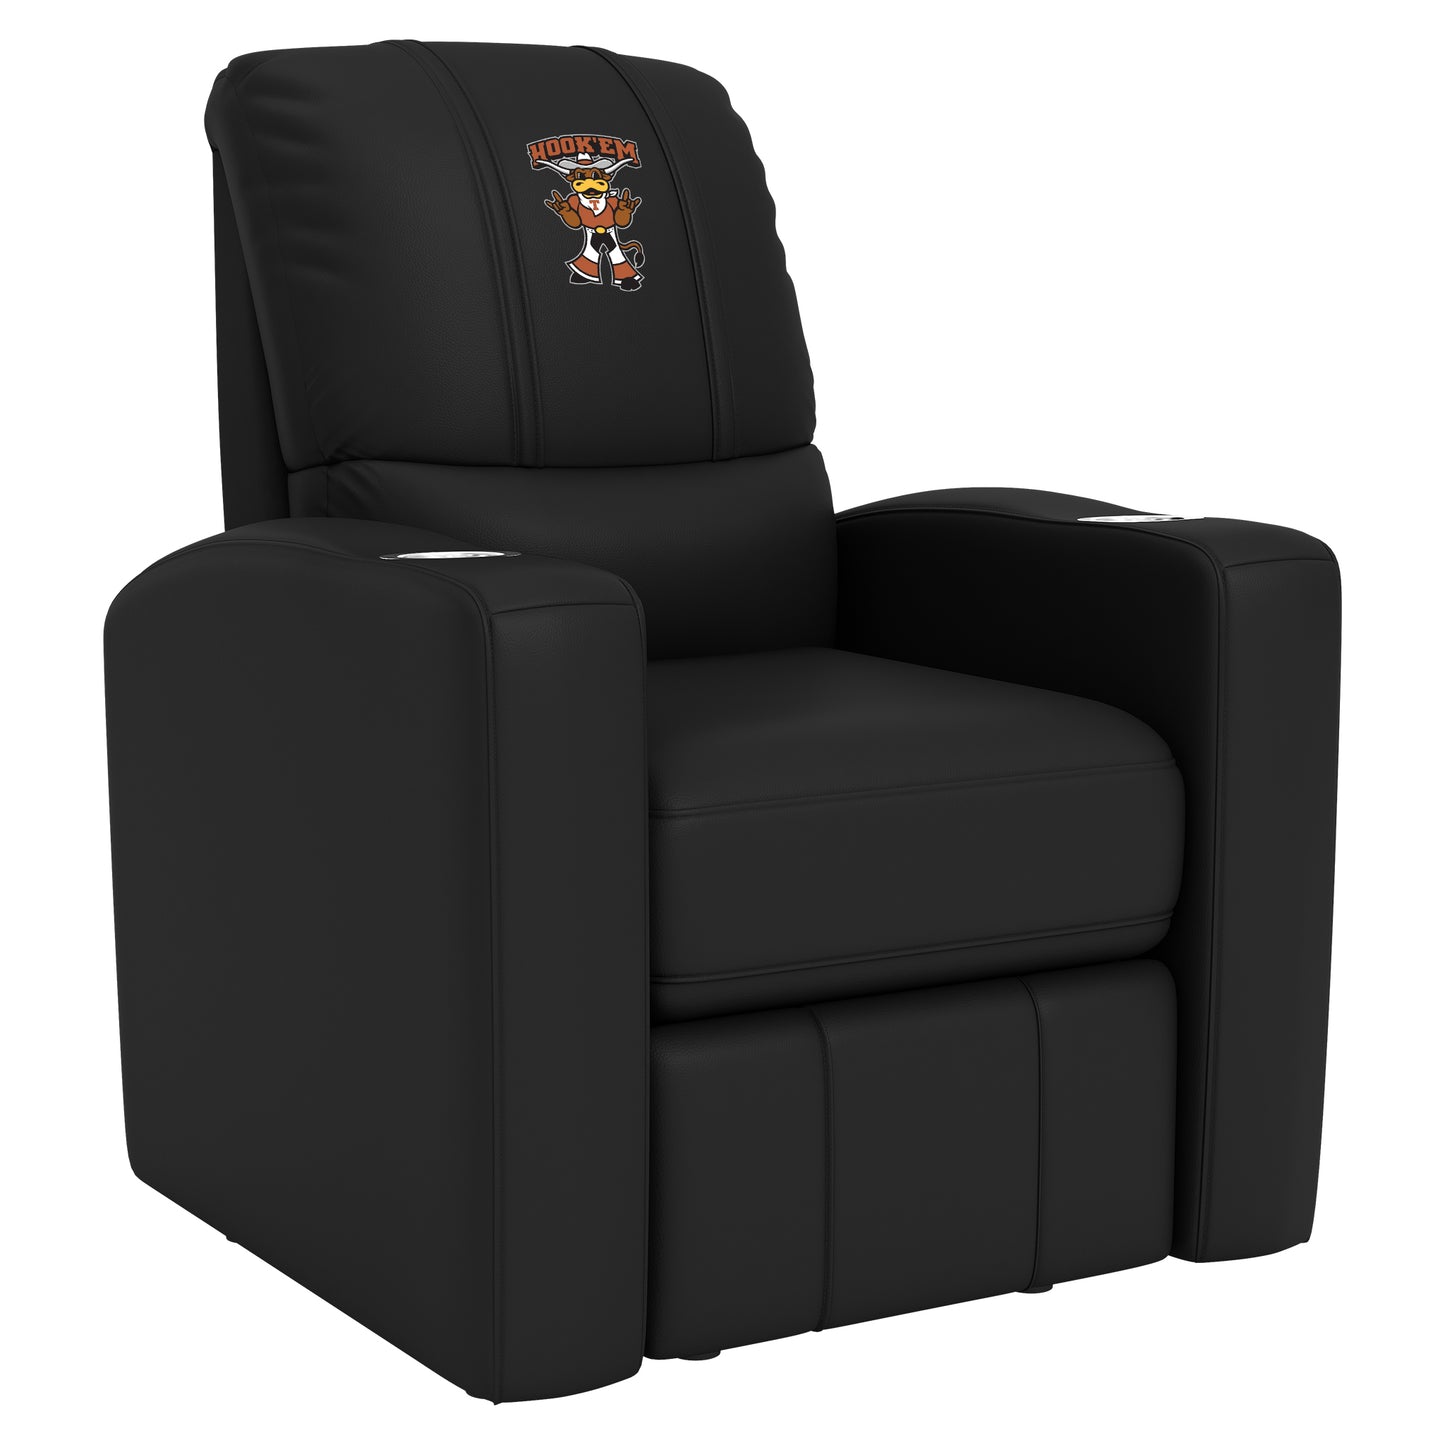 Stealth Recliner with Texas Longhorns Alternate